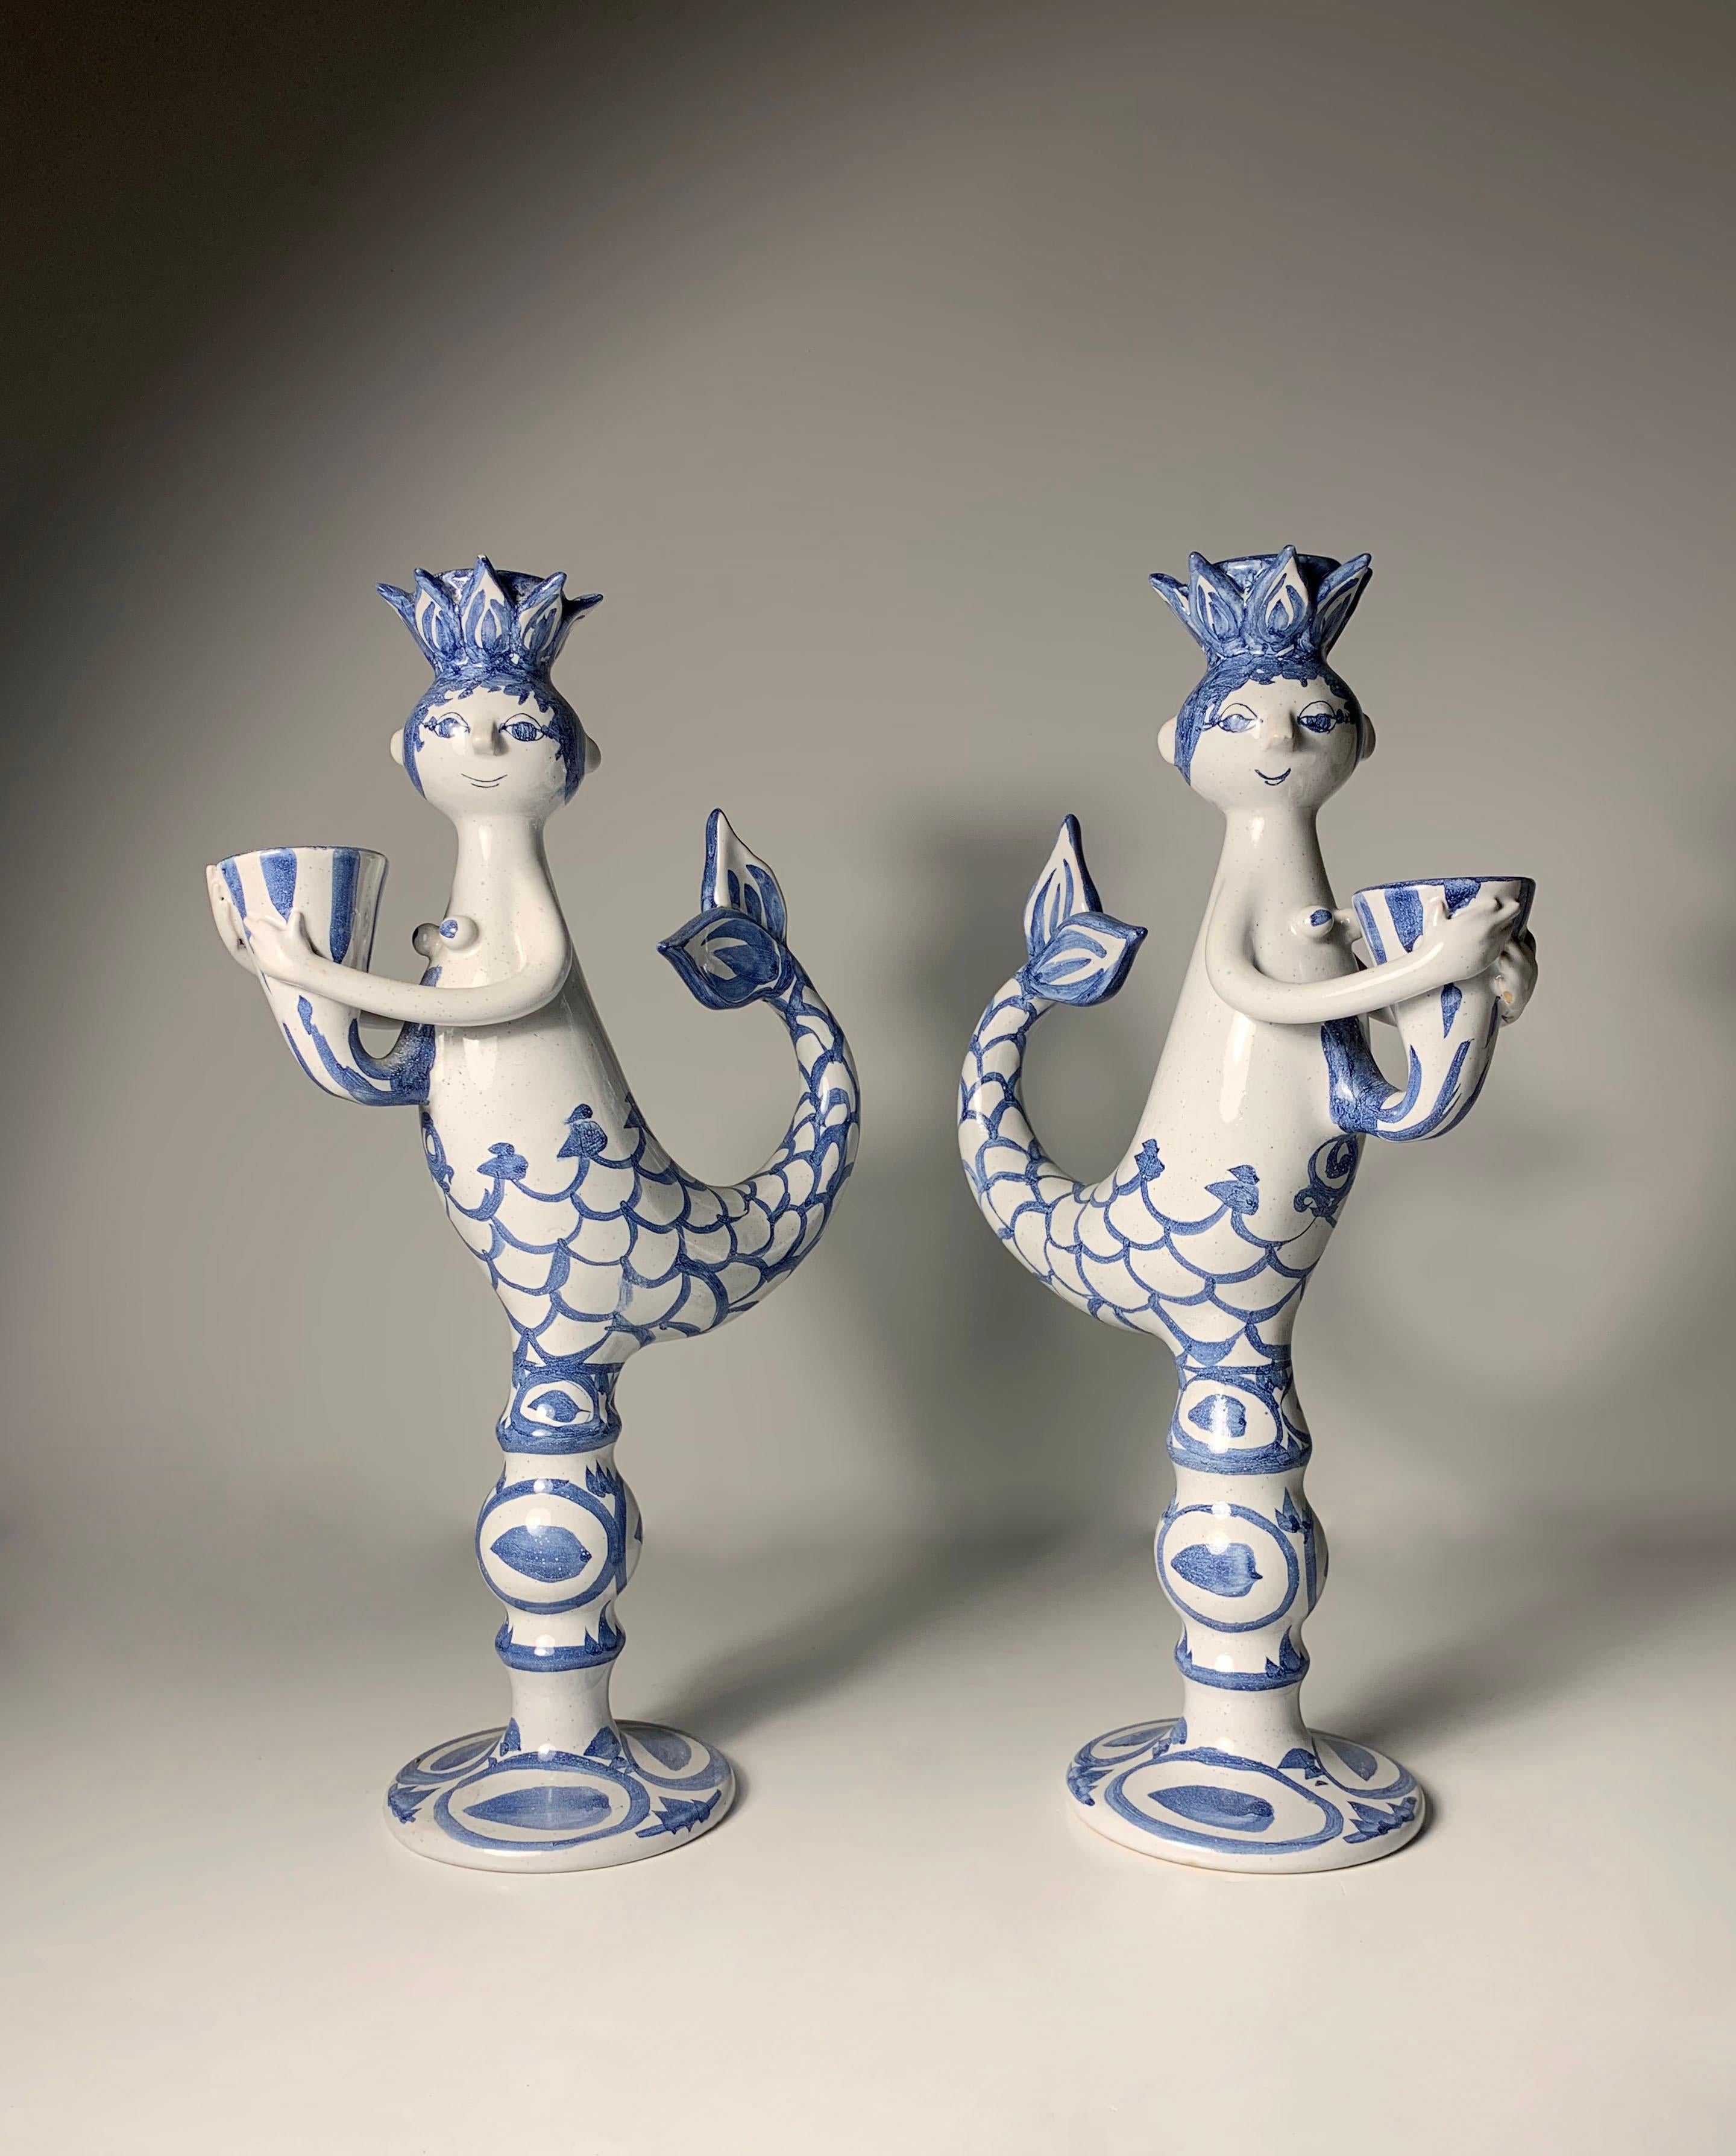 Pair of Early Bjorn Wiinblad Art Pottery Candlesticks. Signed & Dated 1969.

Some minor knicks on one as shown. One minor professional restoration to a small chip on the other.  More pictures available upon request.